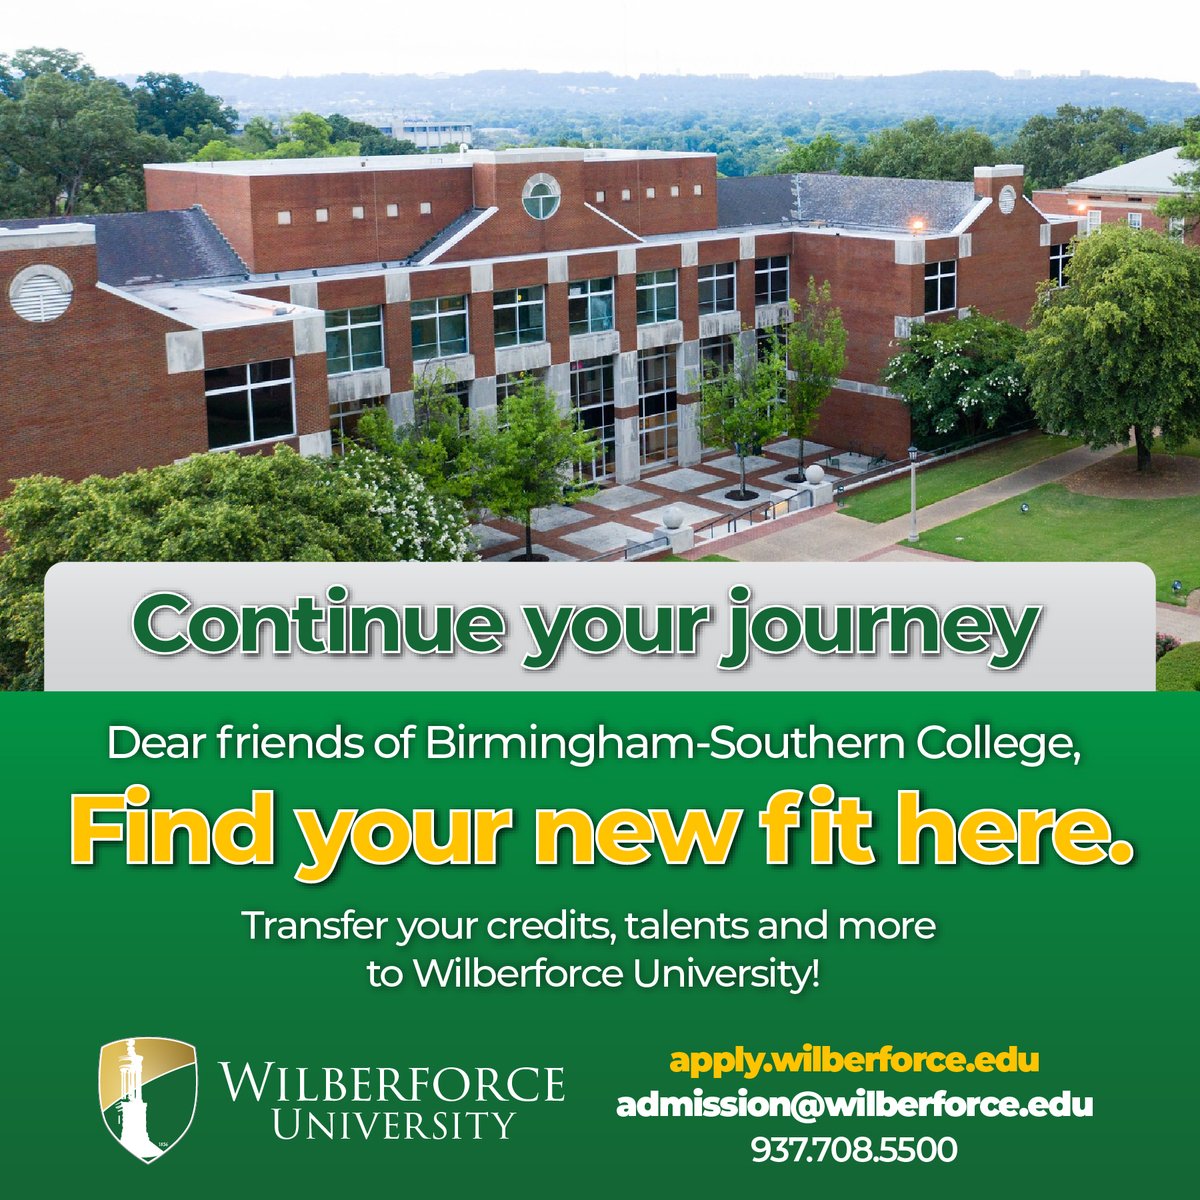 We’re deeply saddened by the news of @fromthehilltop's planned closure. Our hearts go out to the faculty, staff, and students affected by this unfortunate turn of events. At Wilberforce University, we extend our arms to welcome those seeking a new educational journey.